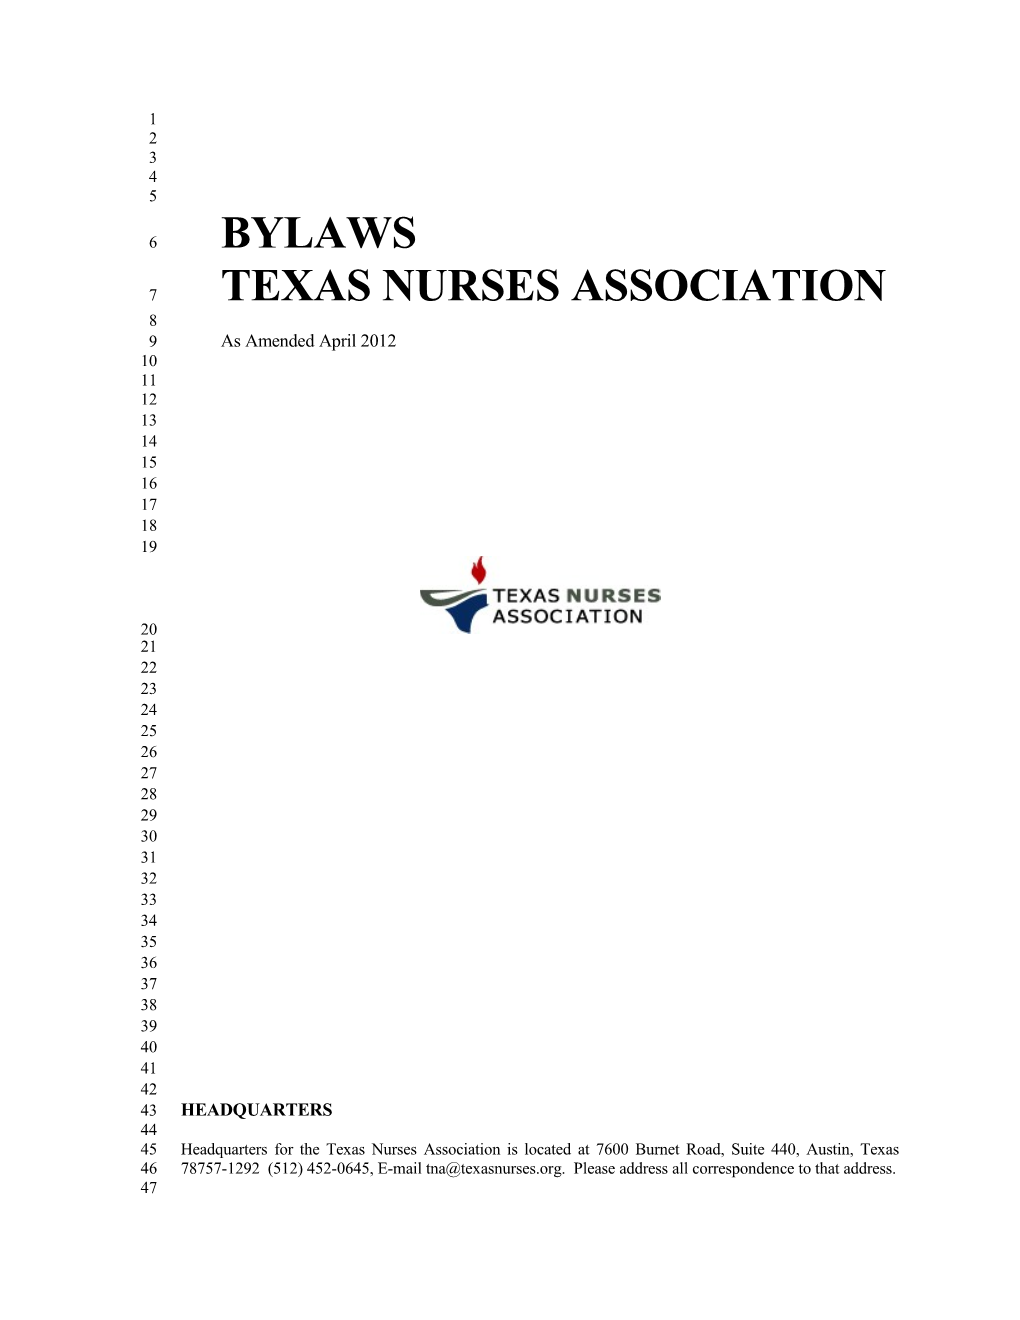 BYLAWS As Am 4/98 with Headings Cs